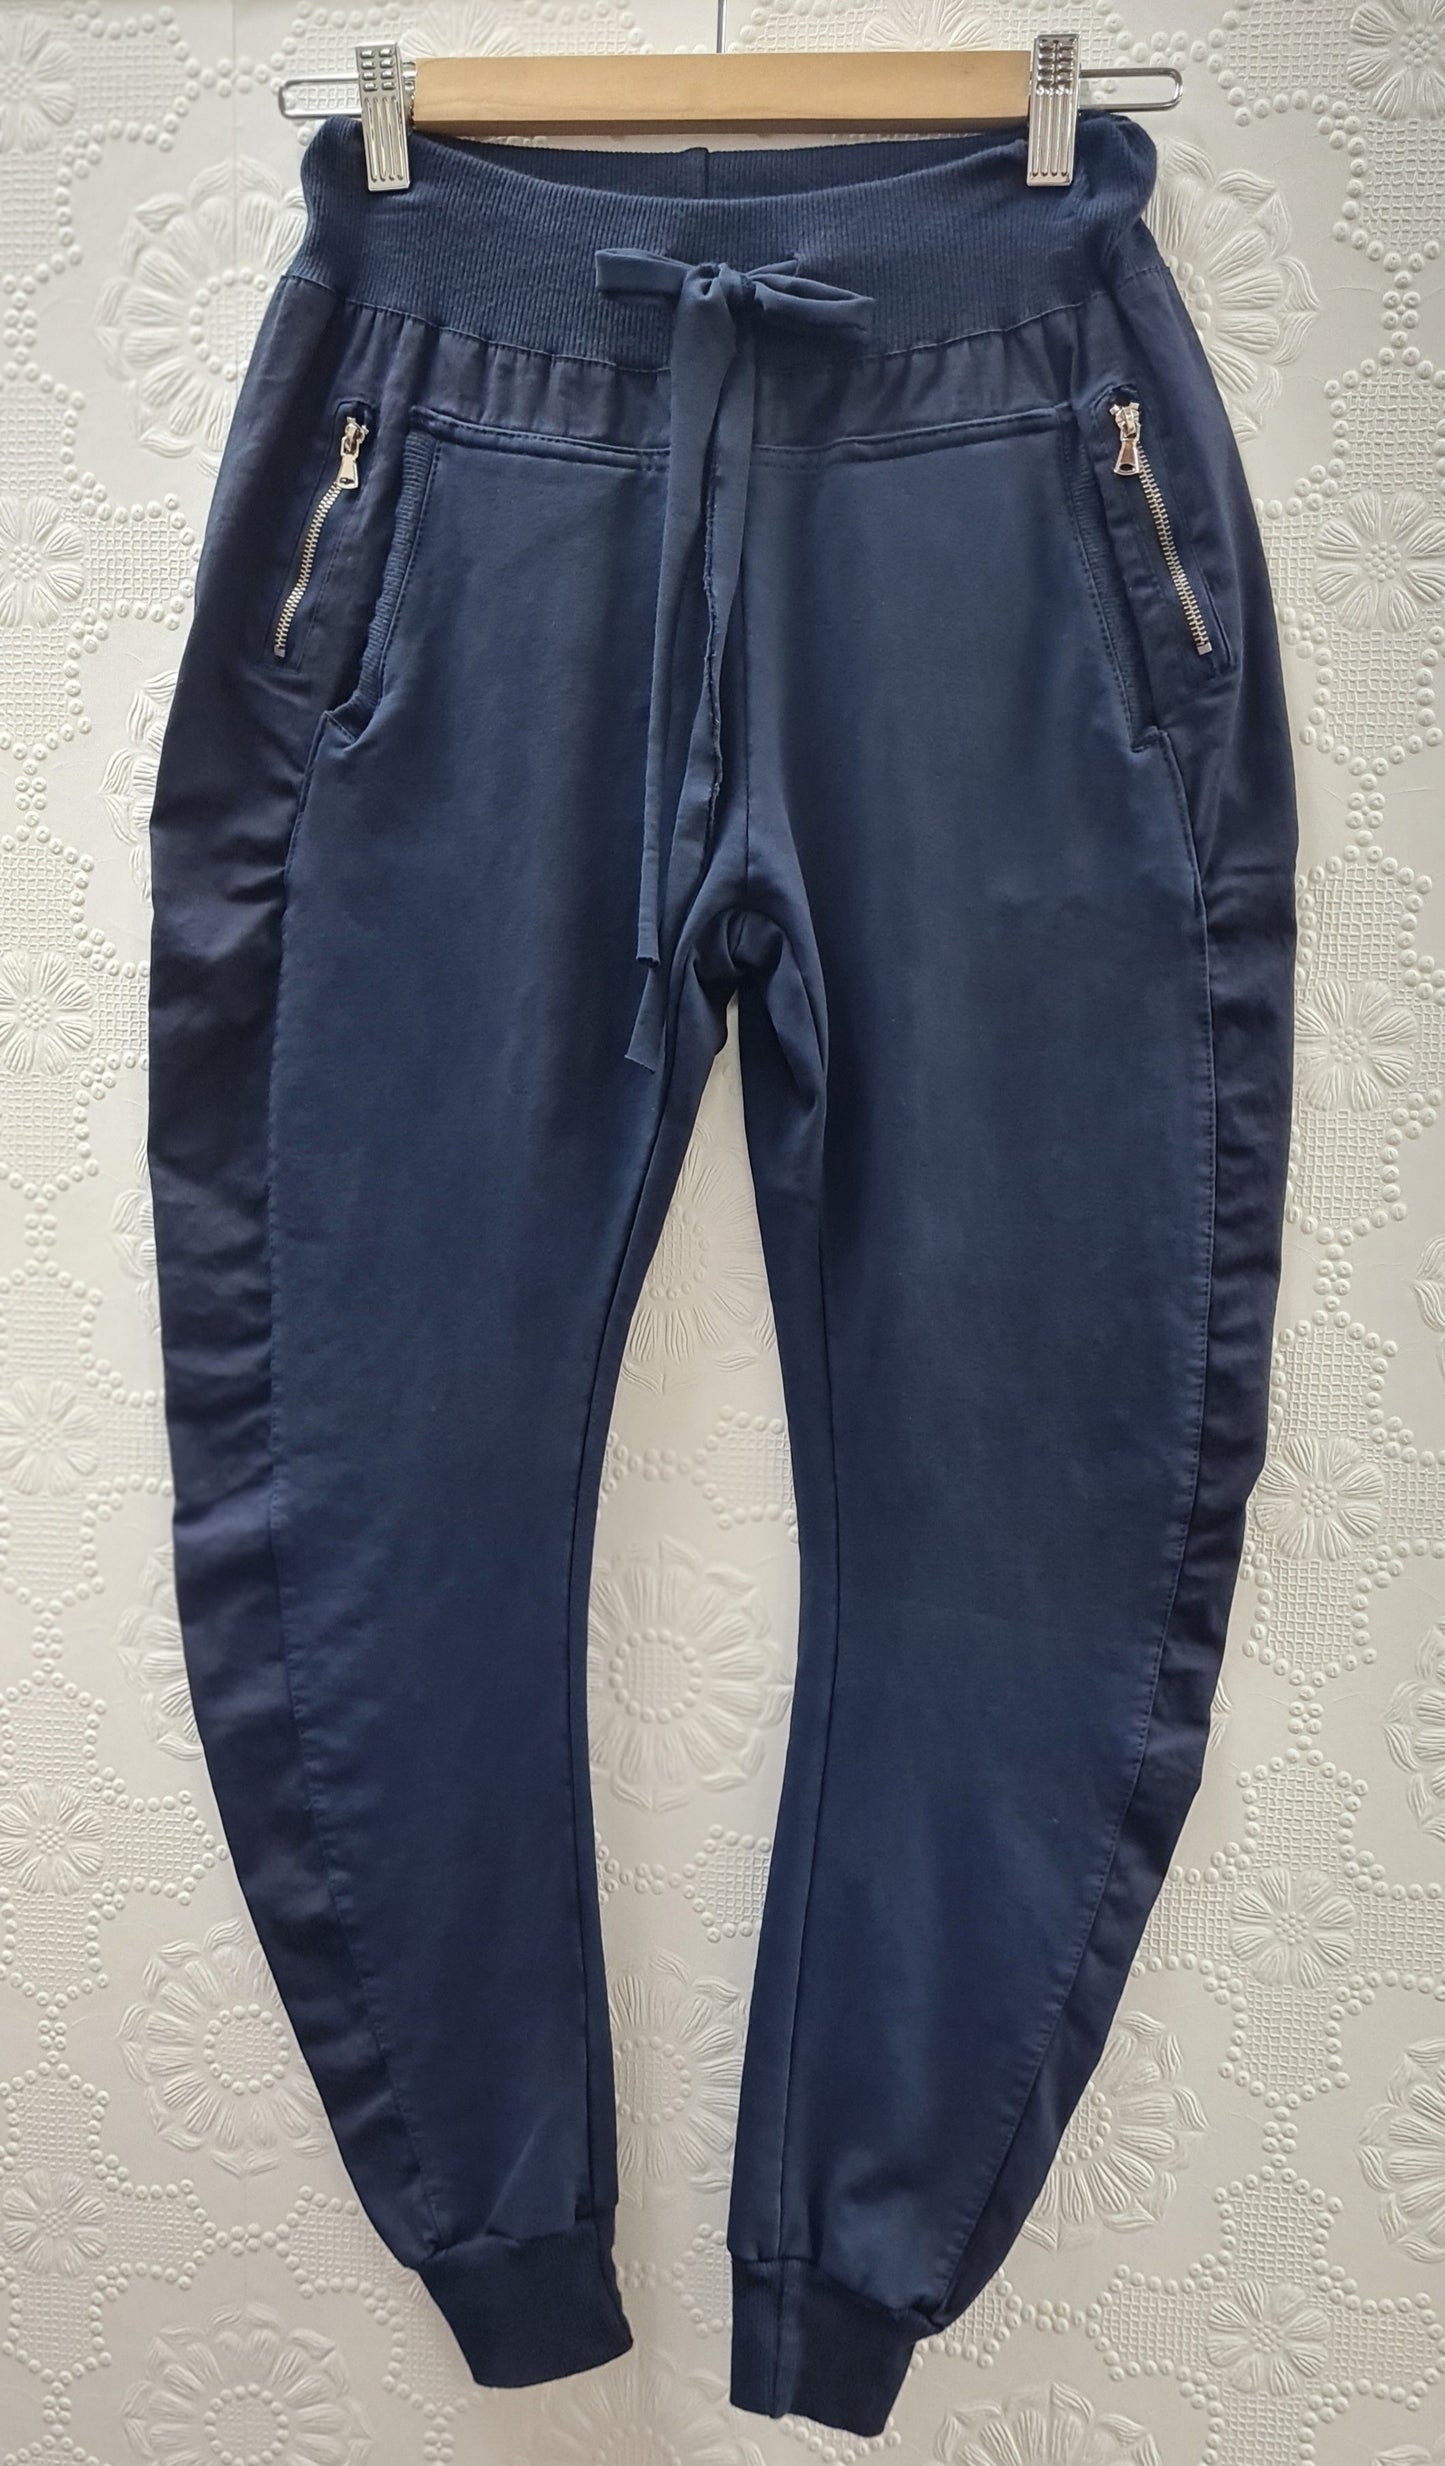 Suzy D Ultimate Joggers - Navy